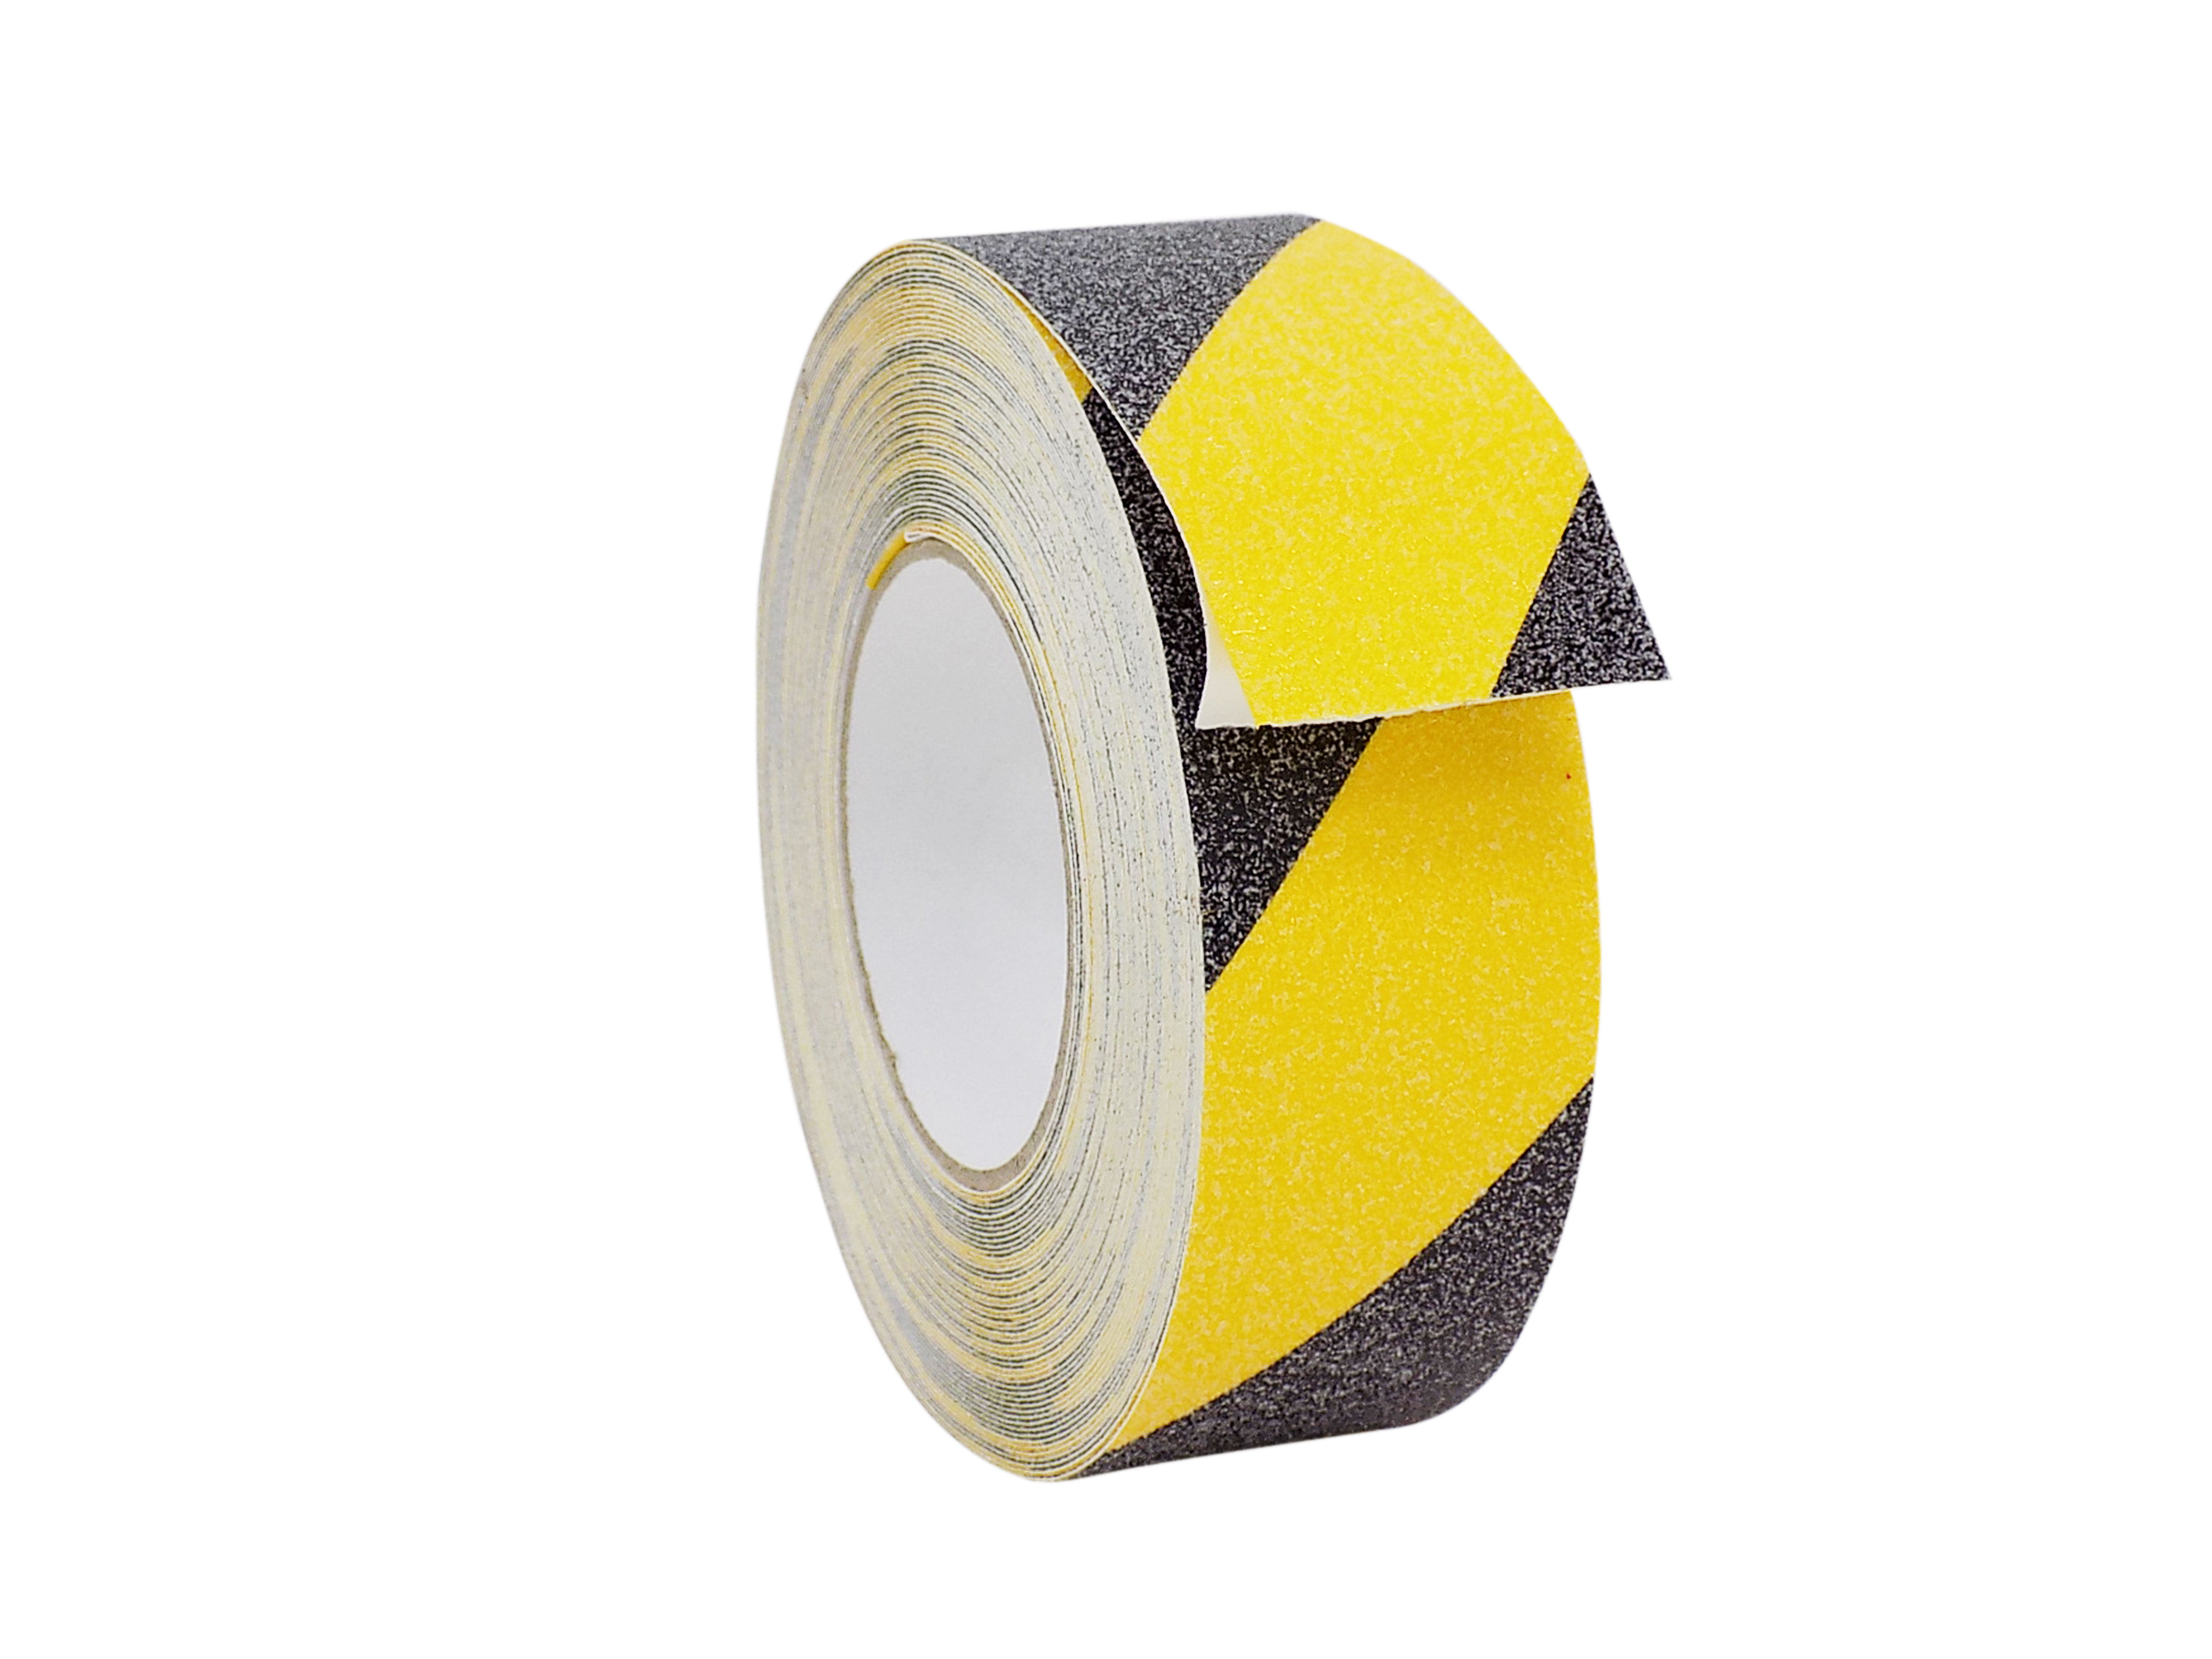 4" x 33 ft Anti Slip Traction Tape Roll Non Skid Safety Sticker Grip Safe Grit